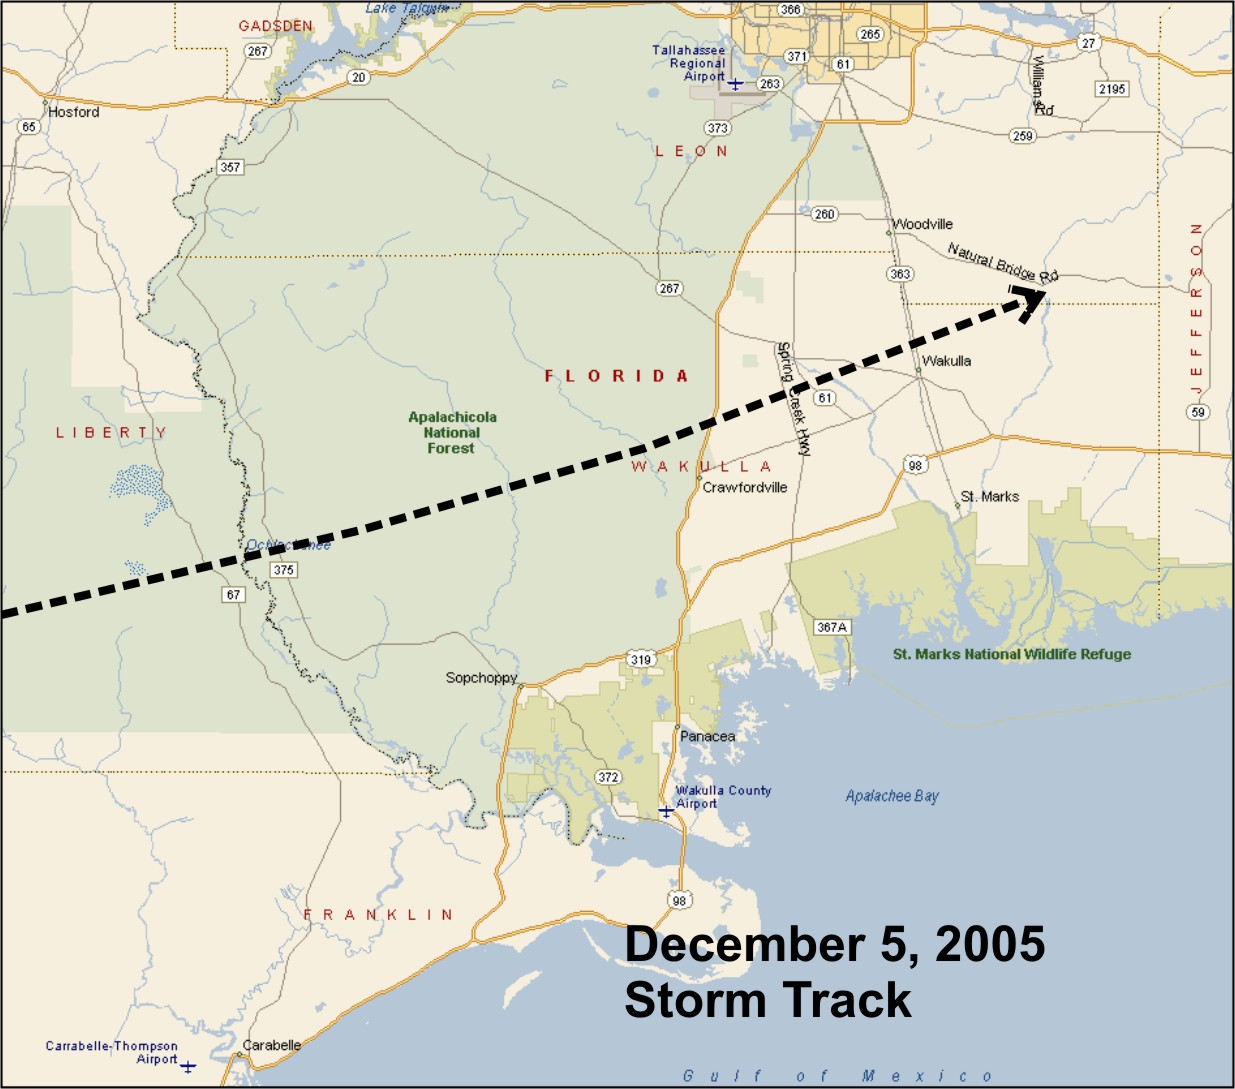 Figure 2. Track of the tornado that crossed Wakulla County, FL, on December 5, 2005.